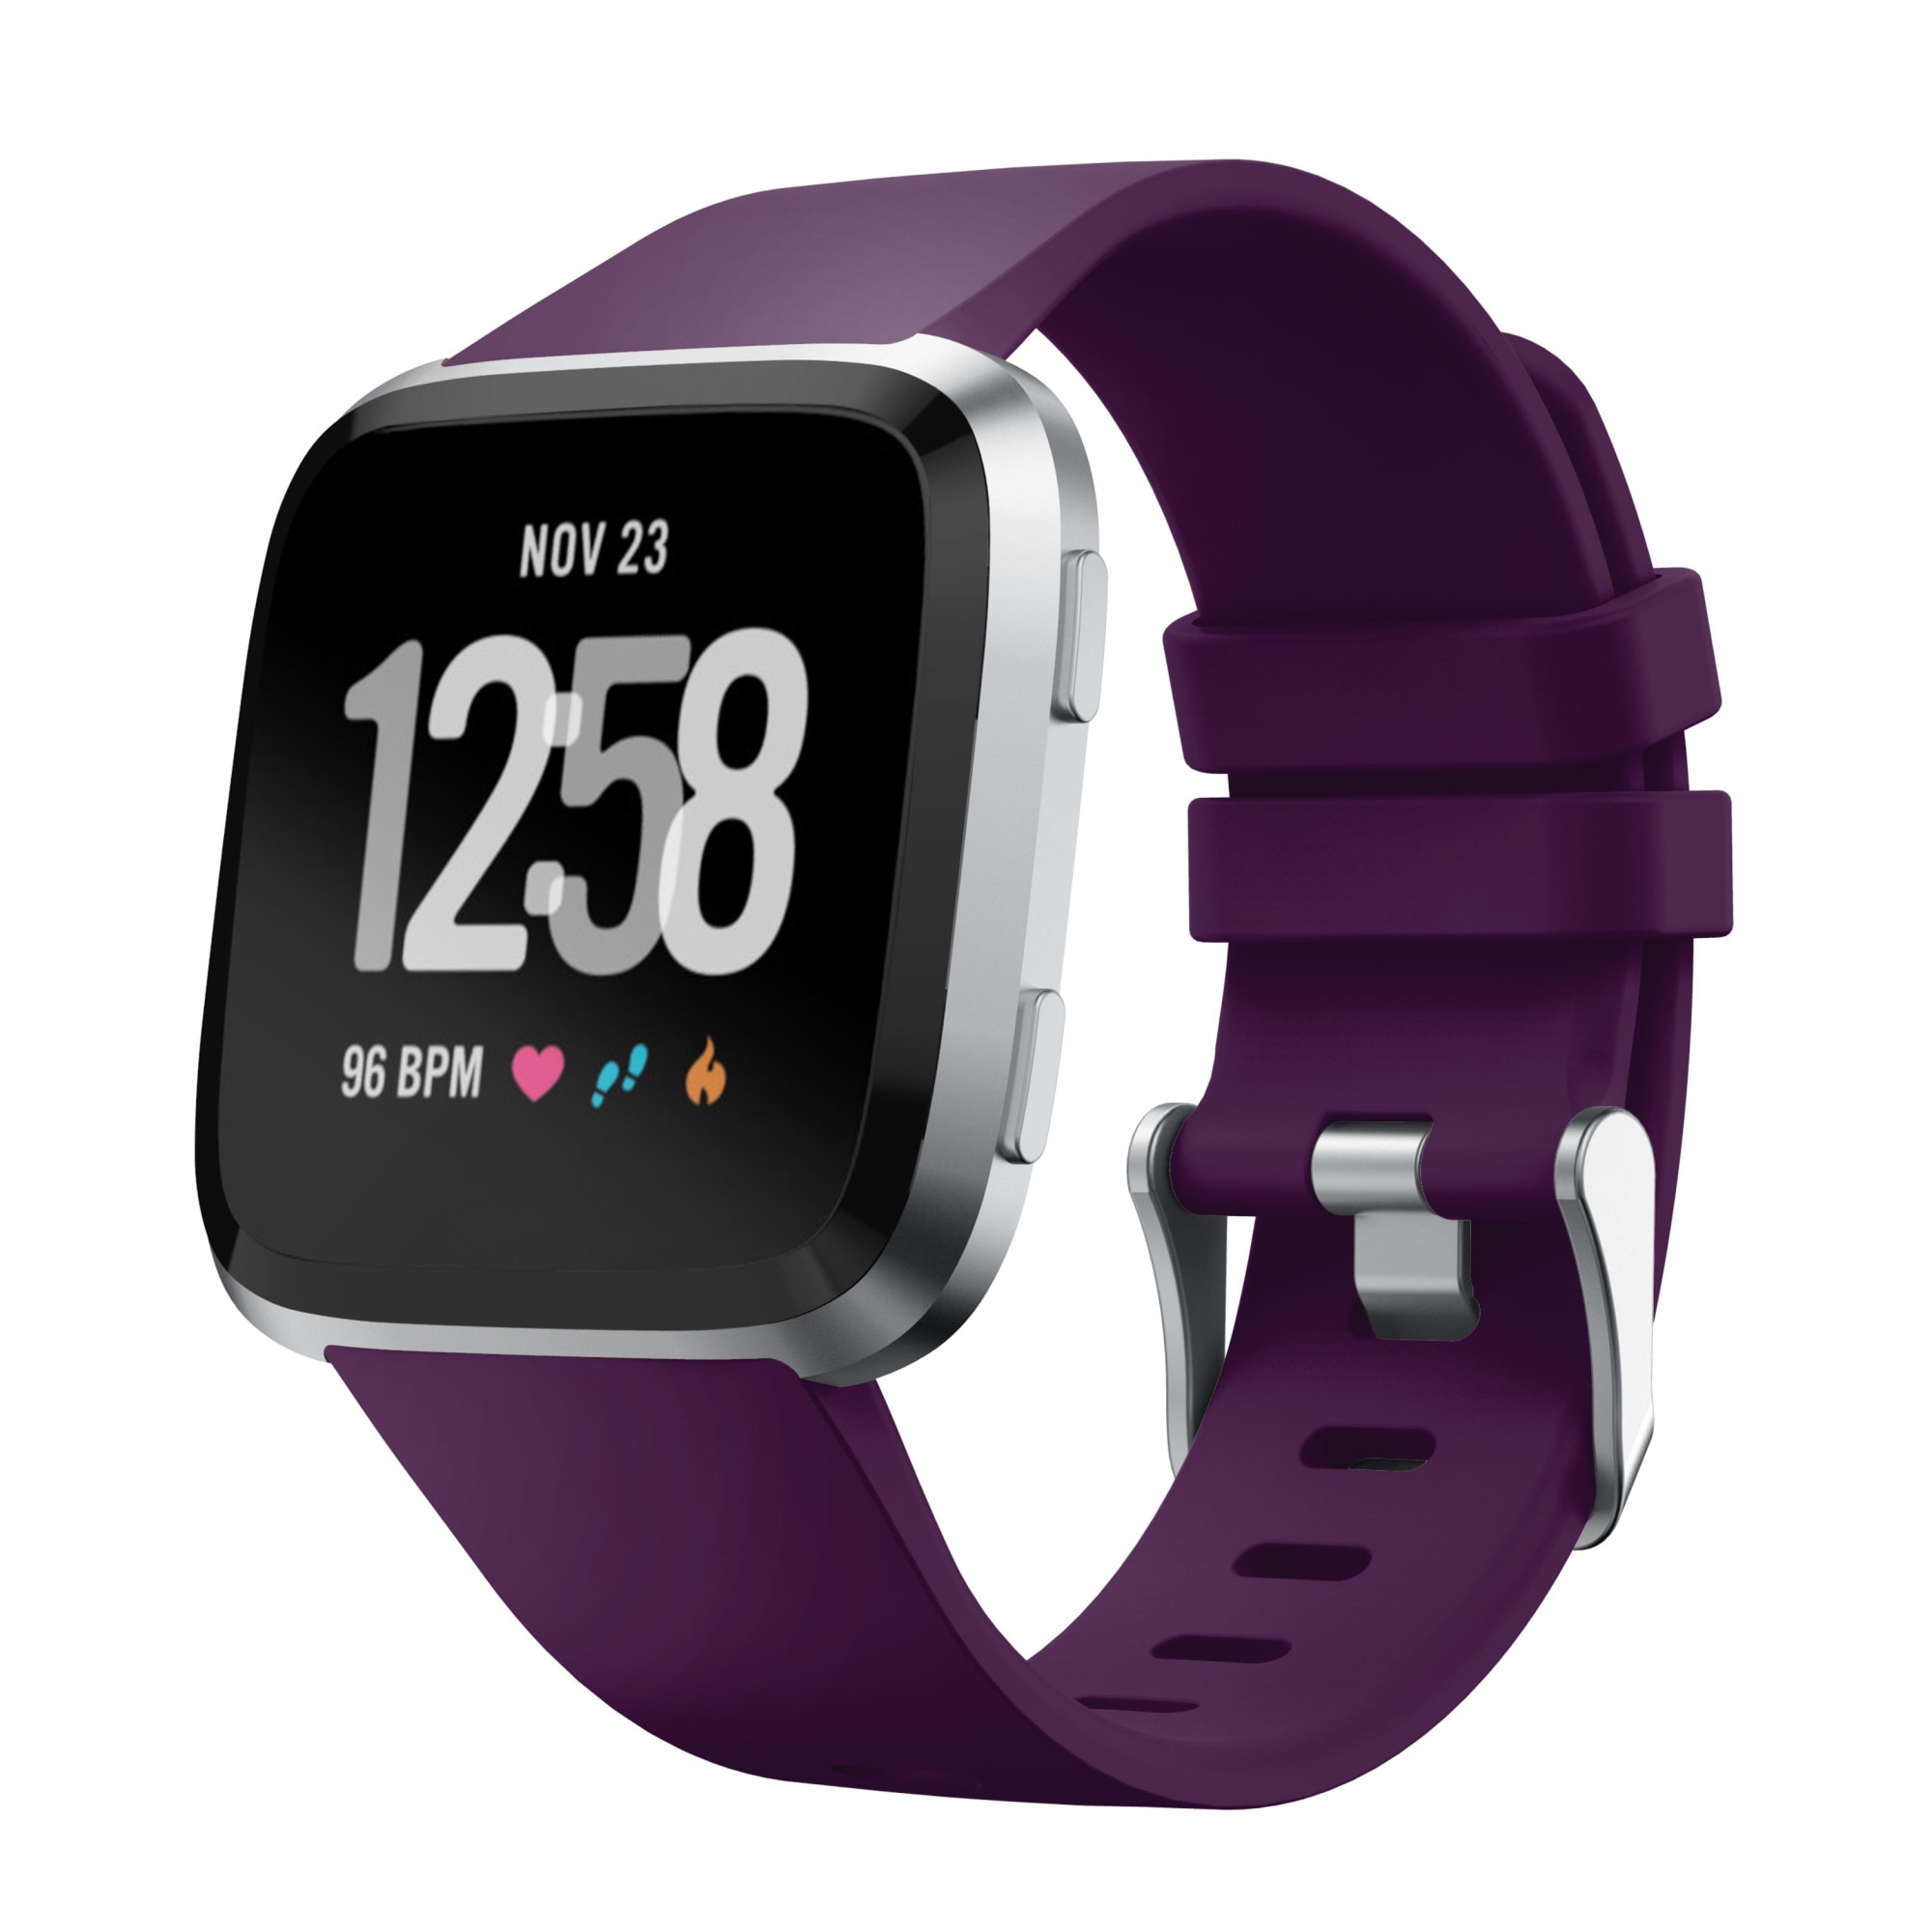 fitbit ionic emag